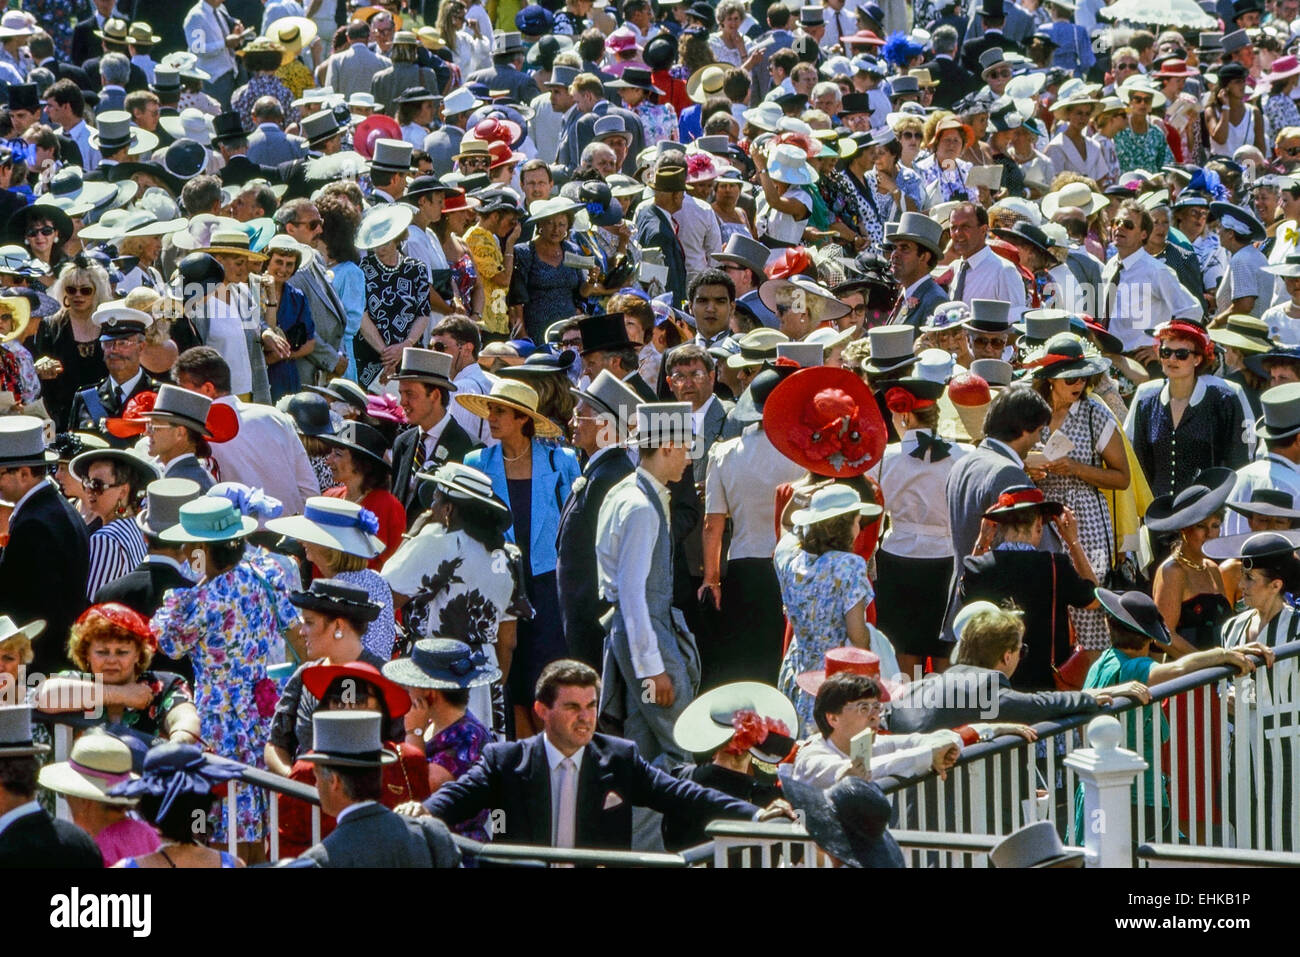 Crowds in the Royal enclosure on Ladies Day at the horse racing at the Royal Ascot. Ascot. Berkshire. England Stock Photo